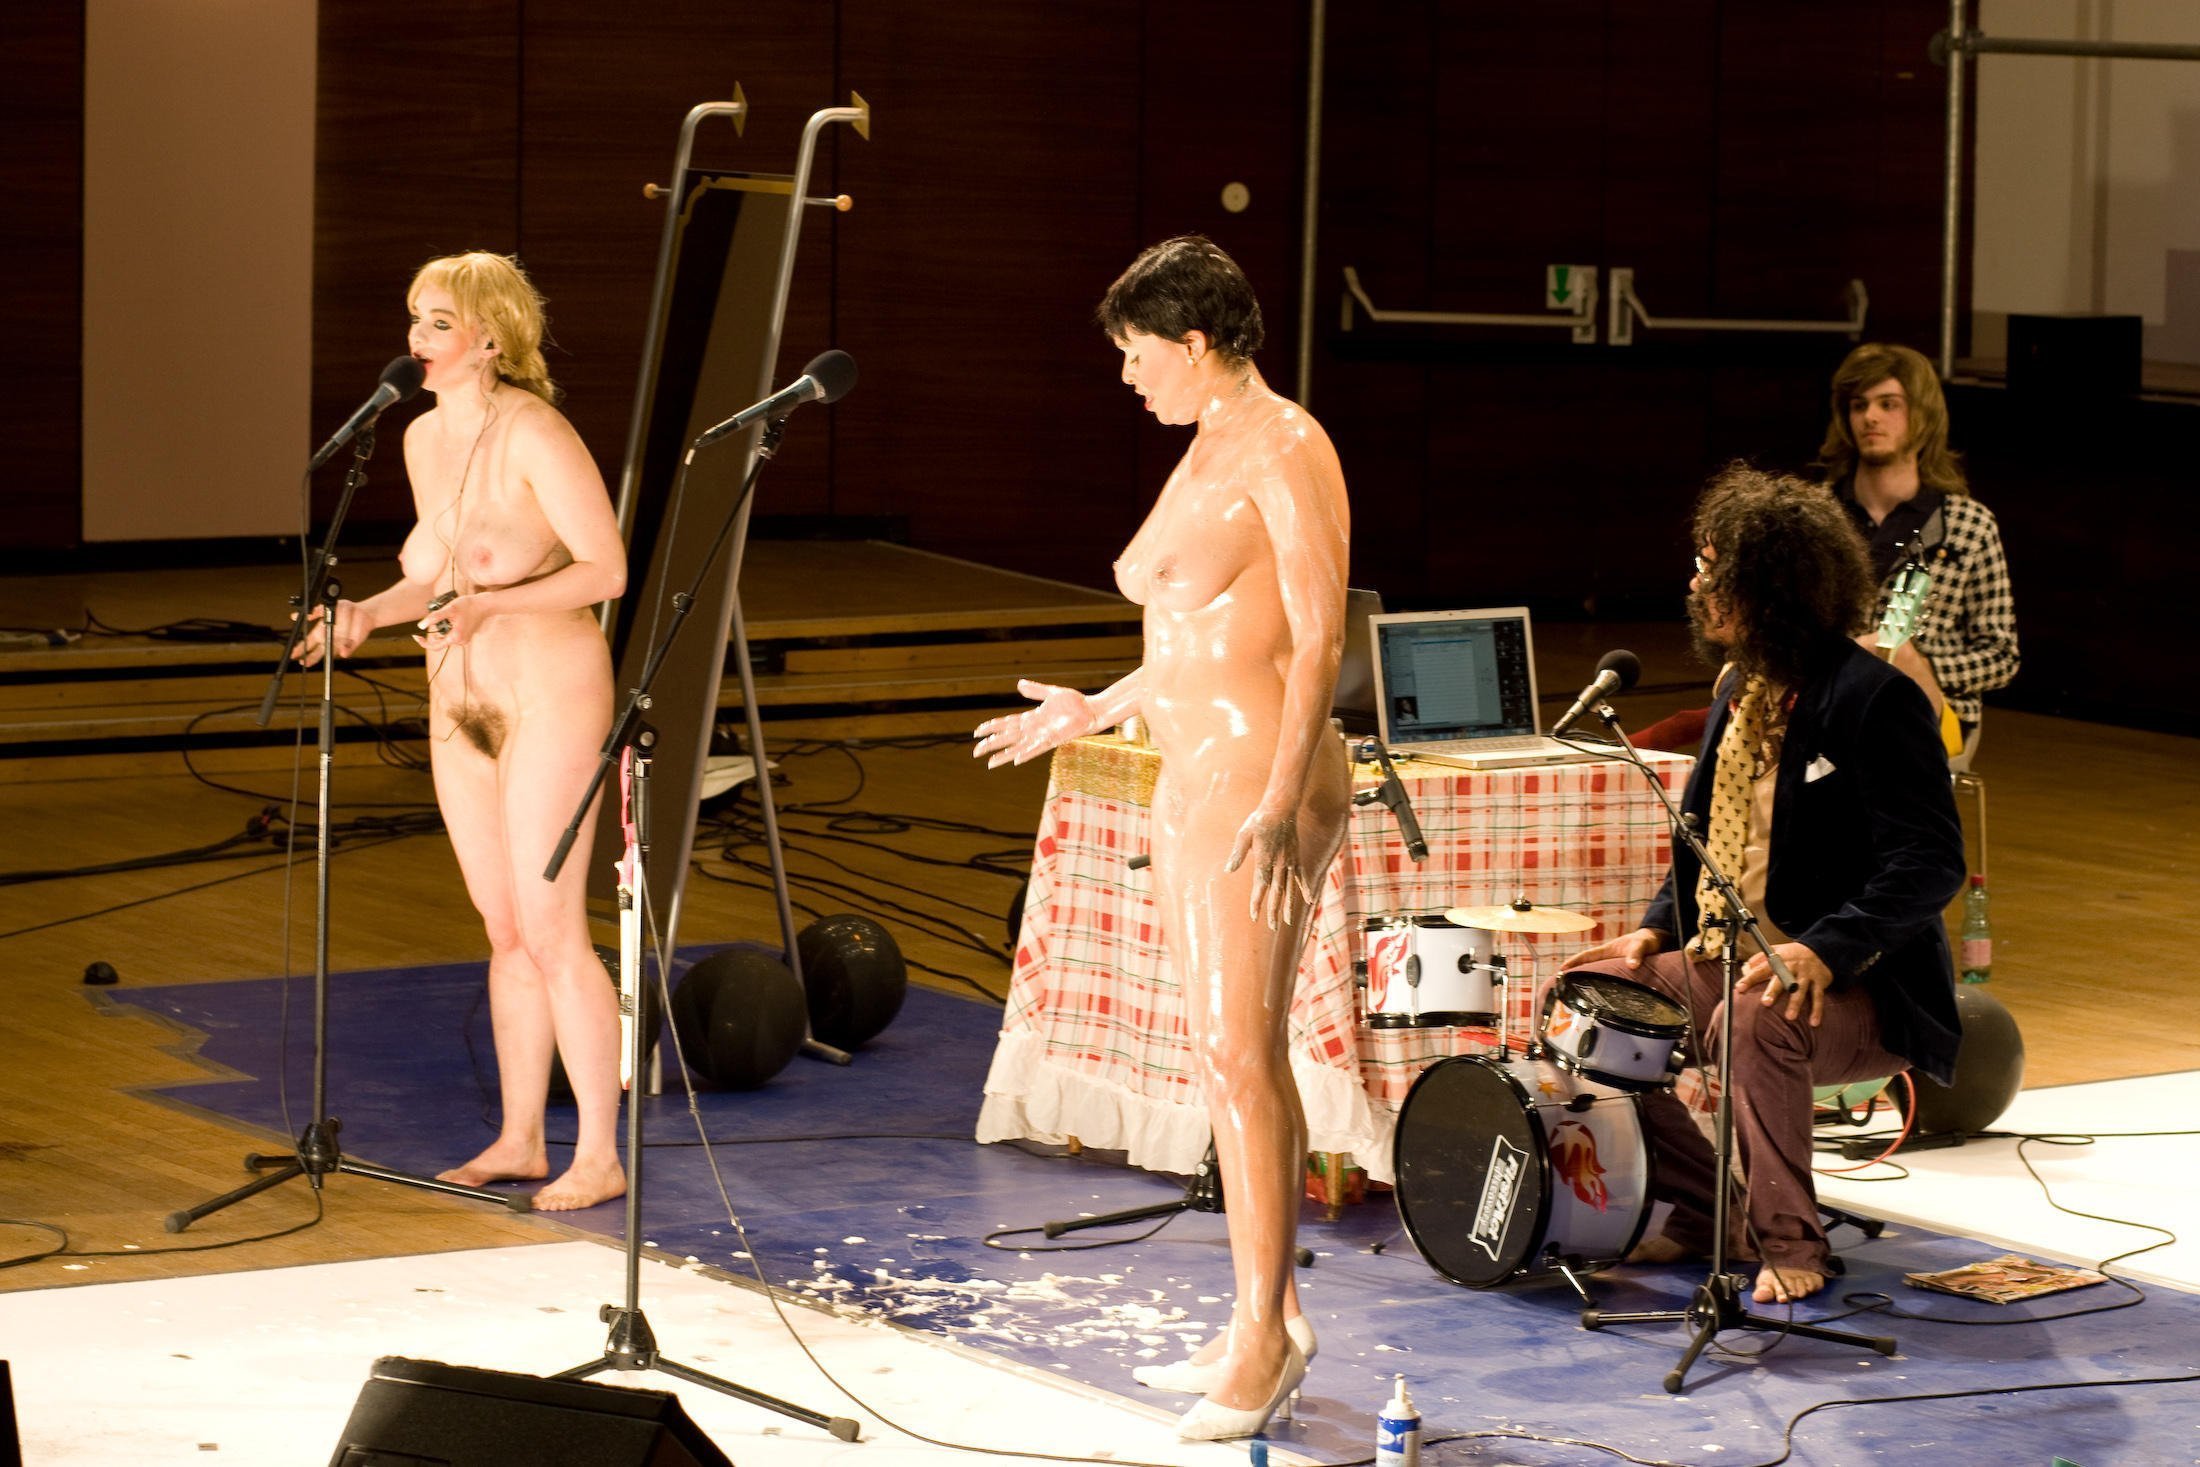 Naked Woman on Stage